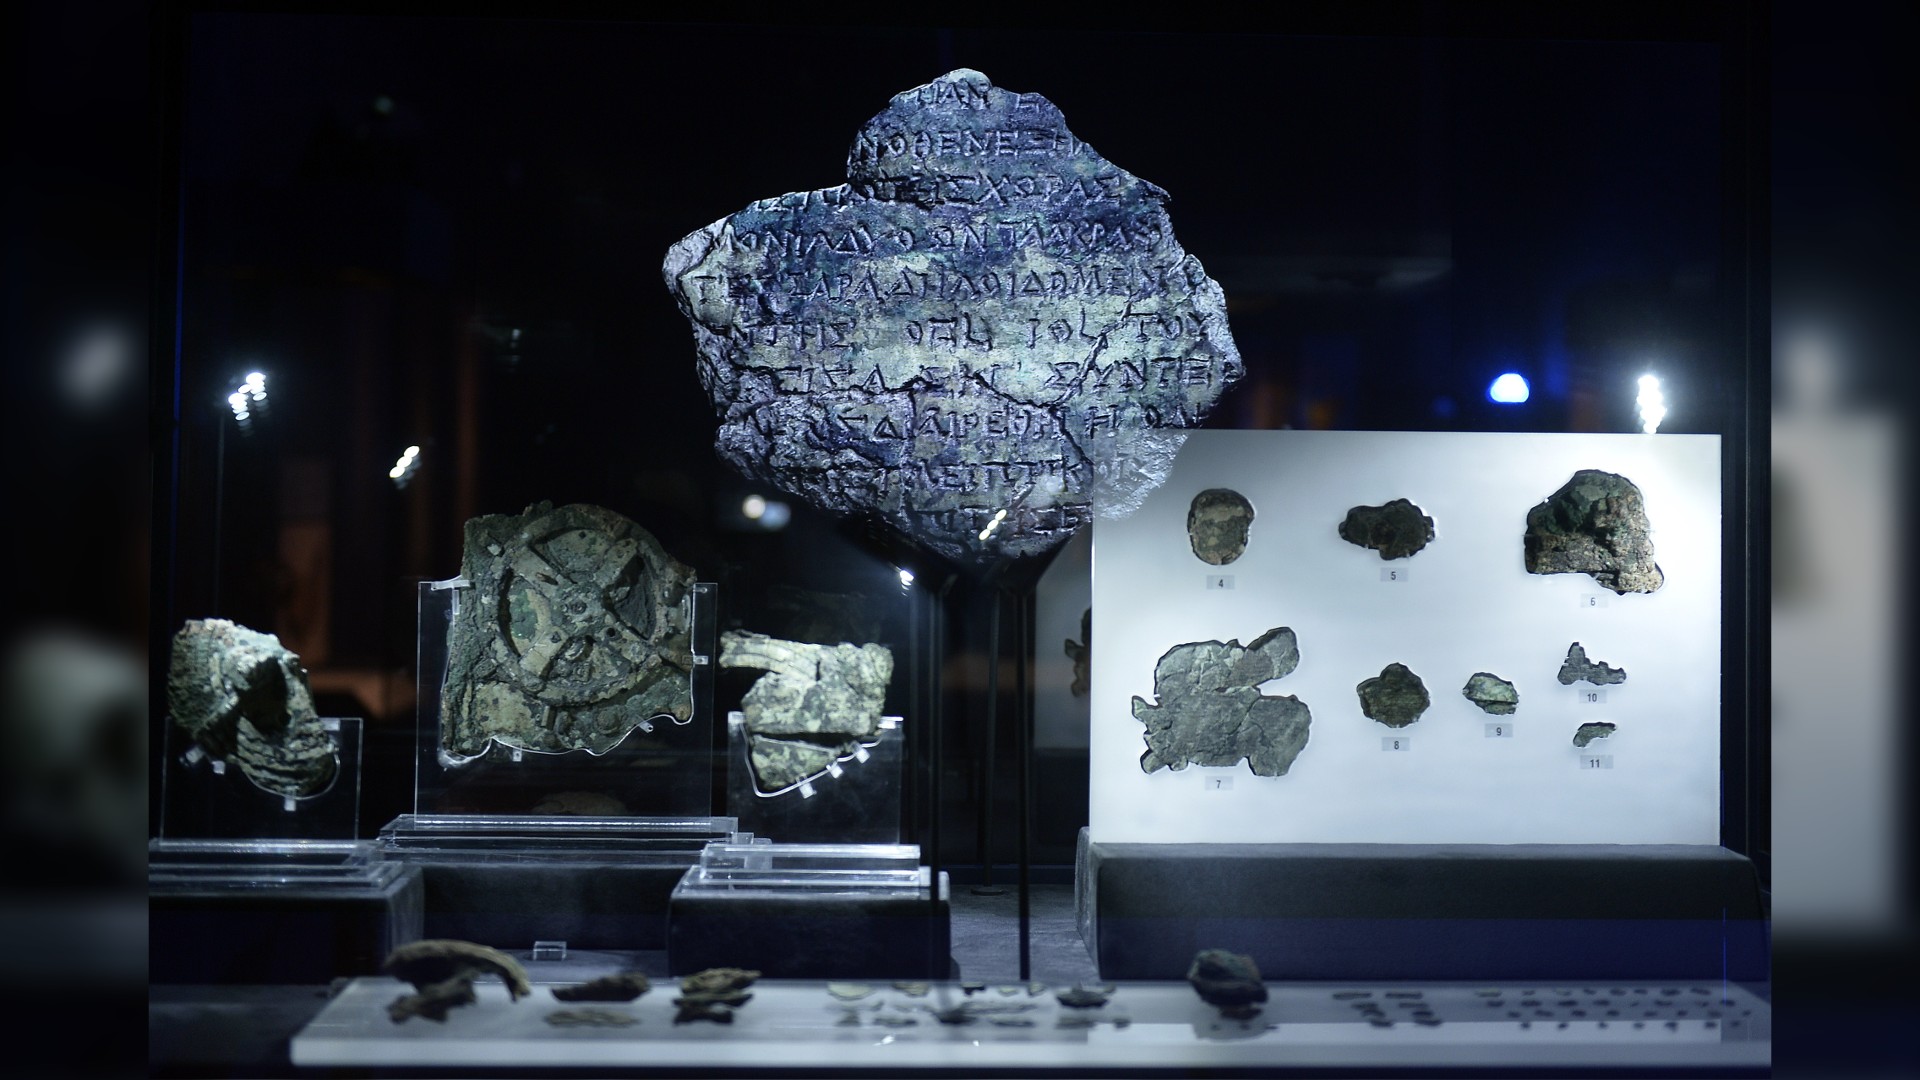 A picture taken at the Archaeological Museum in Athens on September 14, 2014 that shows pieces of the Antikythera Mechanism, a 2nd-century B.C. device known as the world's oldest computer which tracked astronomical phenomena and the cycles of the Solar System. Here we see several items on display, all quite eroded. In the center there is a large piece that has some writing on it in an old language.